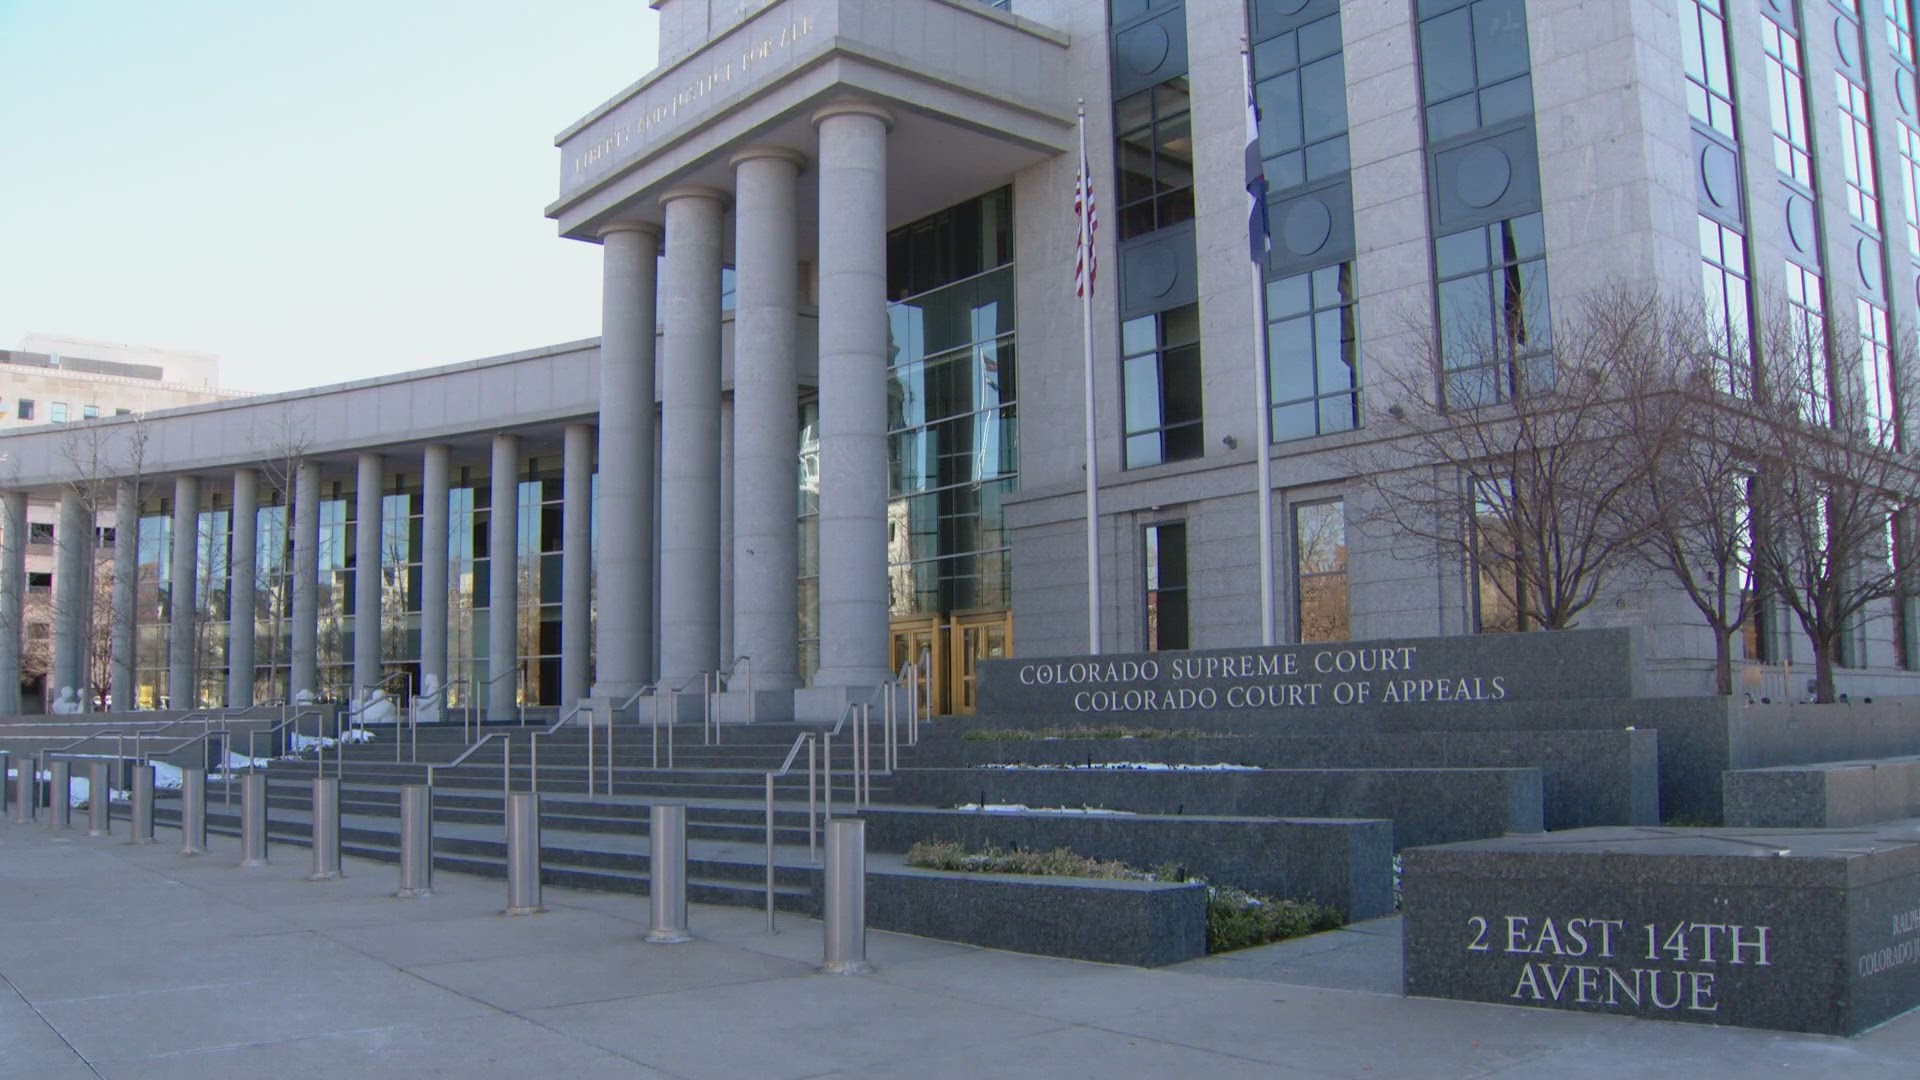 Police responded to a report of a crash near 1300 Broadway early Tuesday morning. A man involved made his way inside the Colorado Supreme Court building.